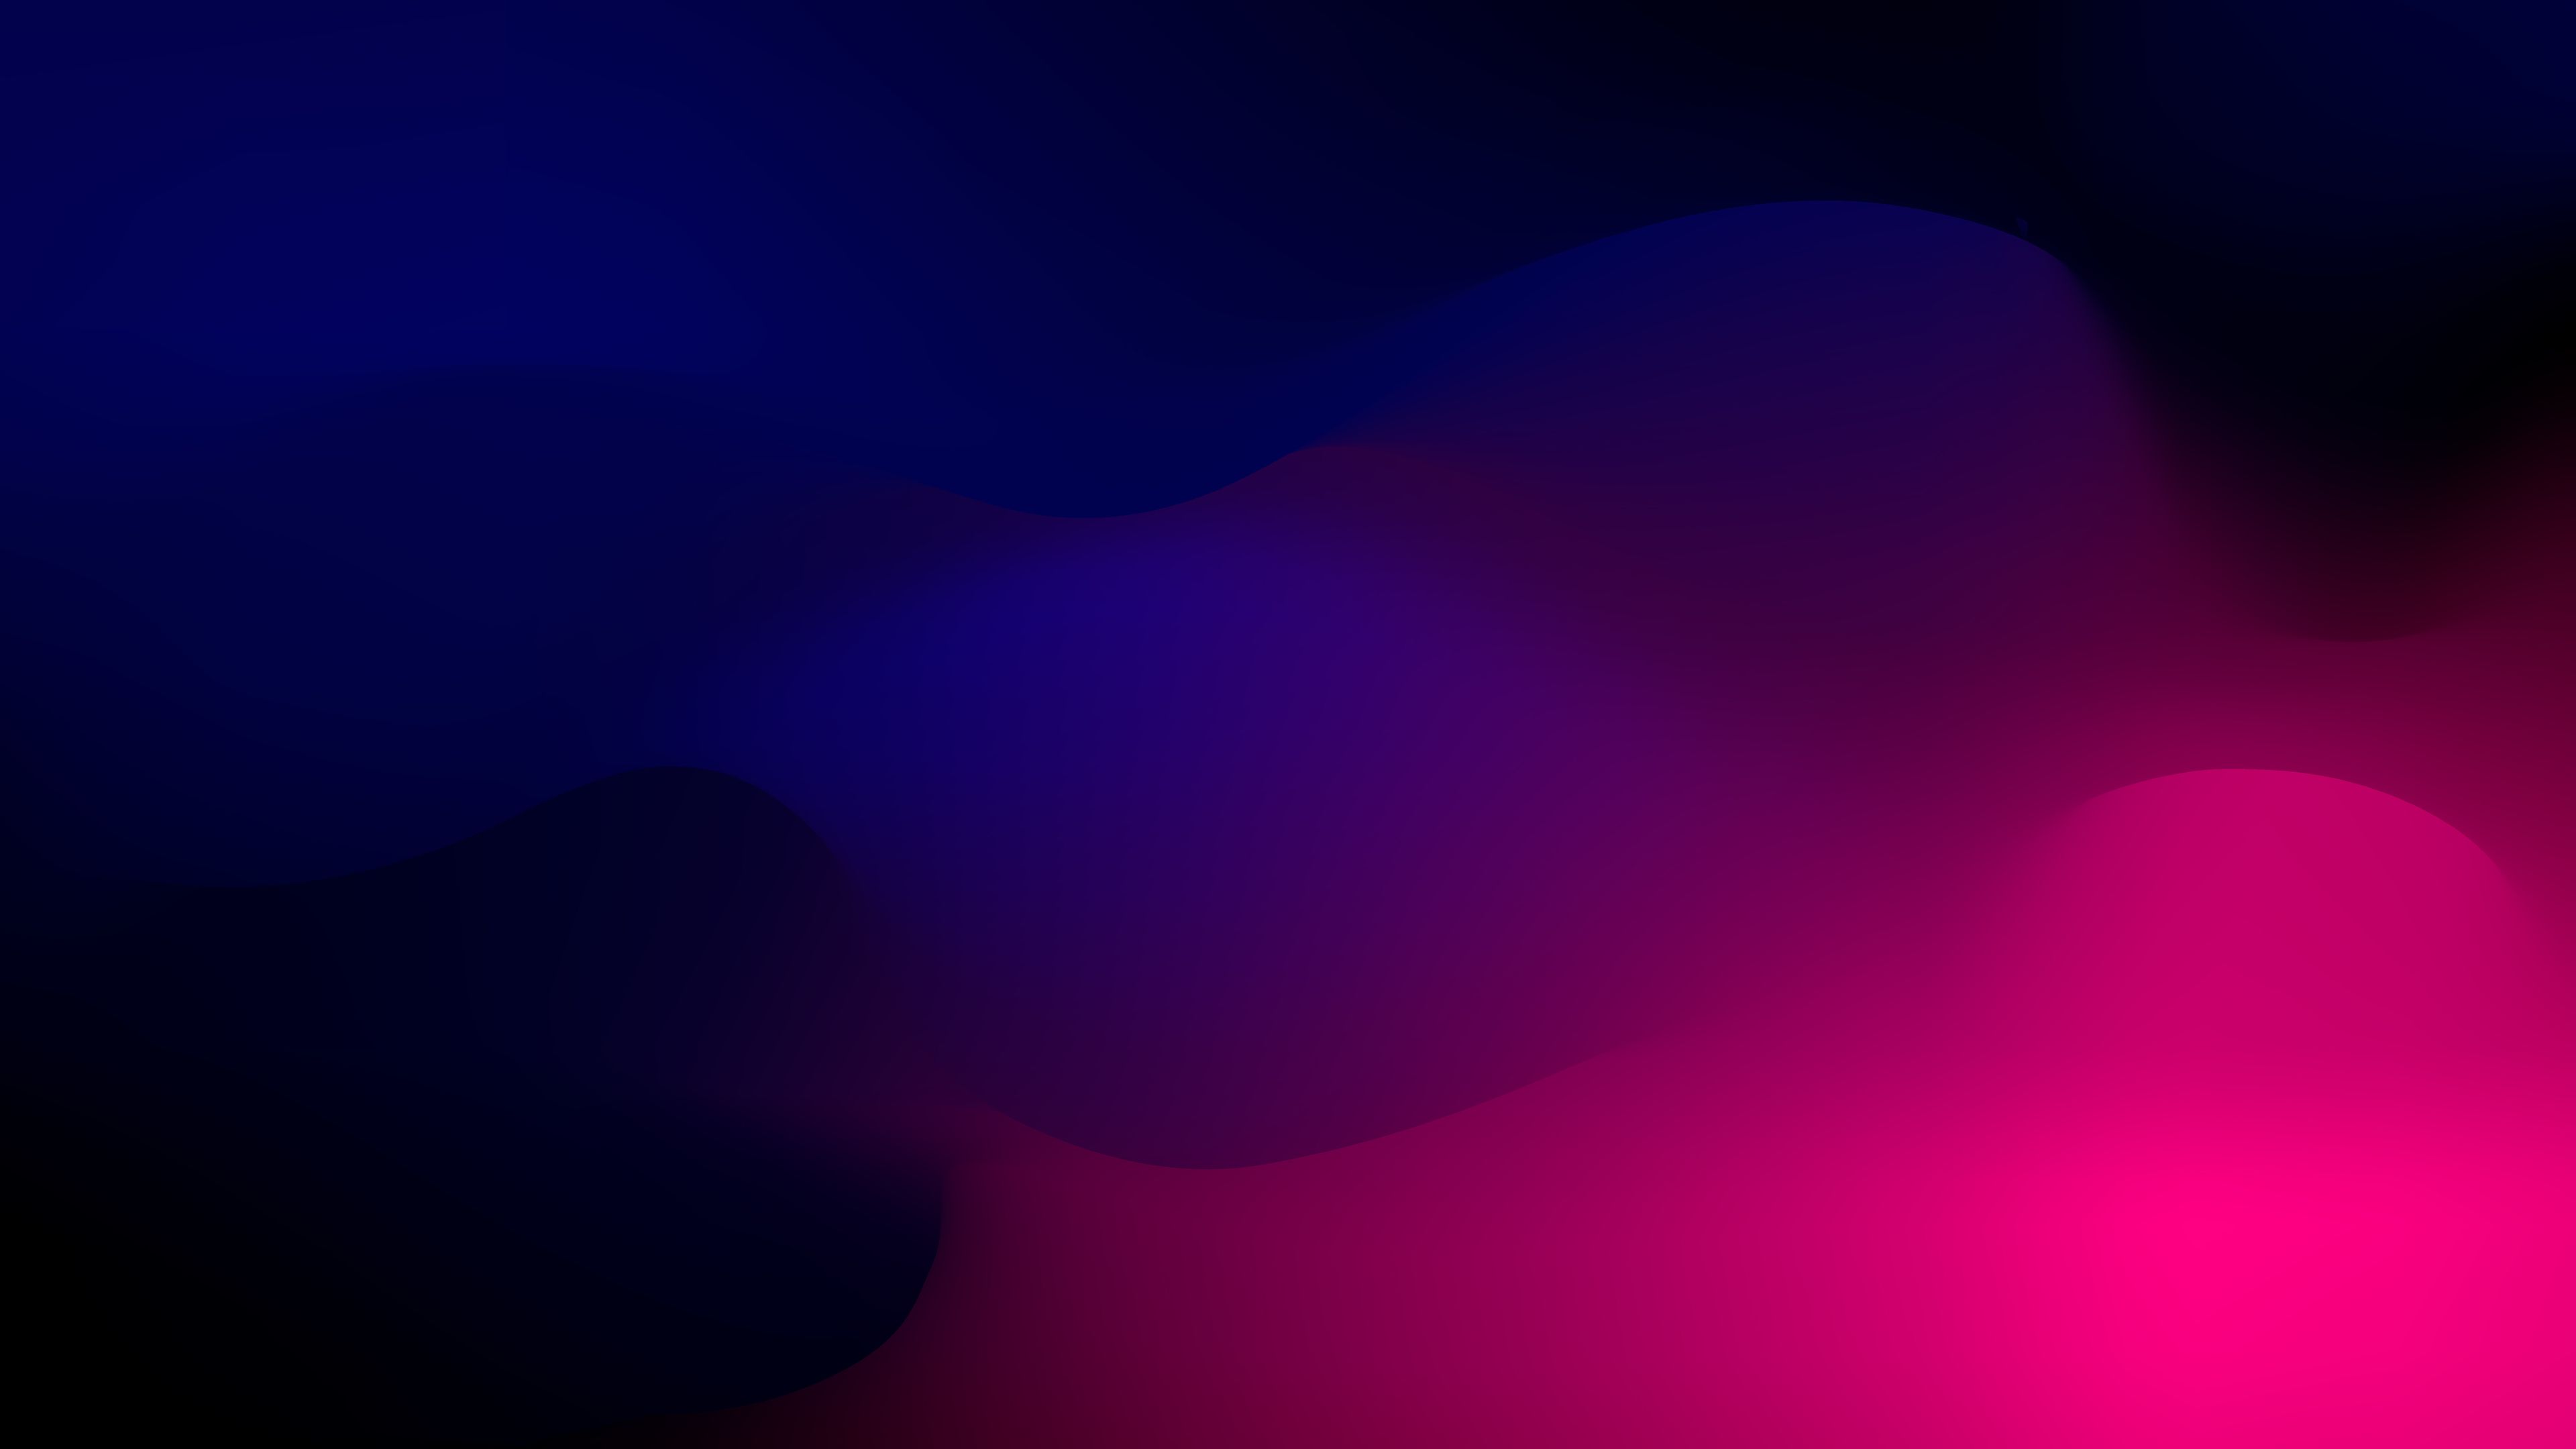 Wallpaper 4k Abstract Simple Colors 8k 4k Wallpaper, 5k Wallpaper, 8k Wallpaper, Abstract Wallpaper, Wallpaper, Hd Wallpaper, Simple Background Wallpaper